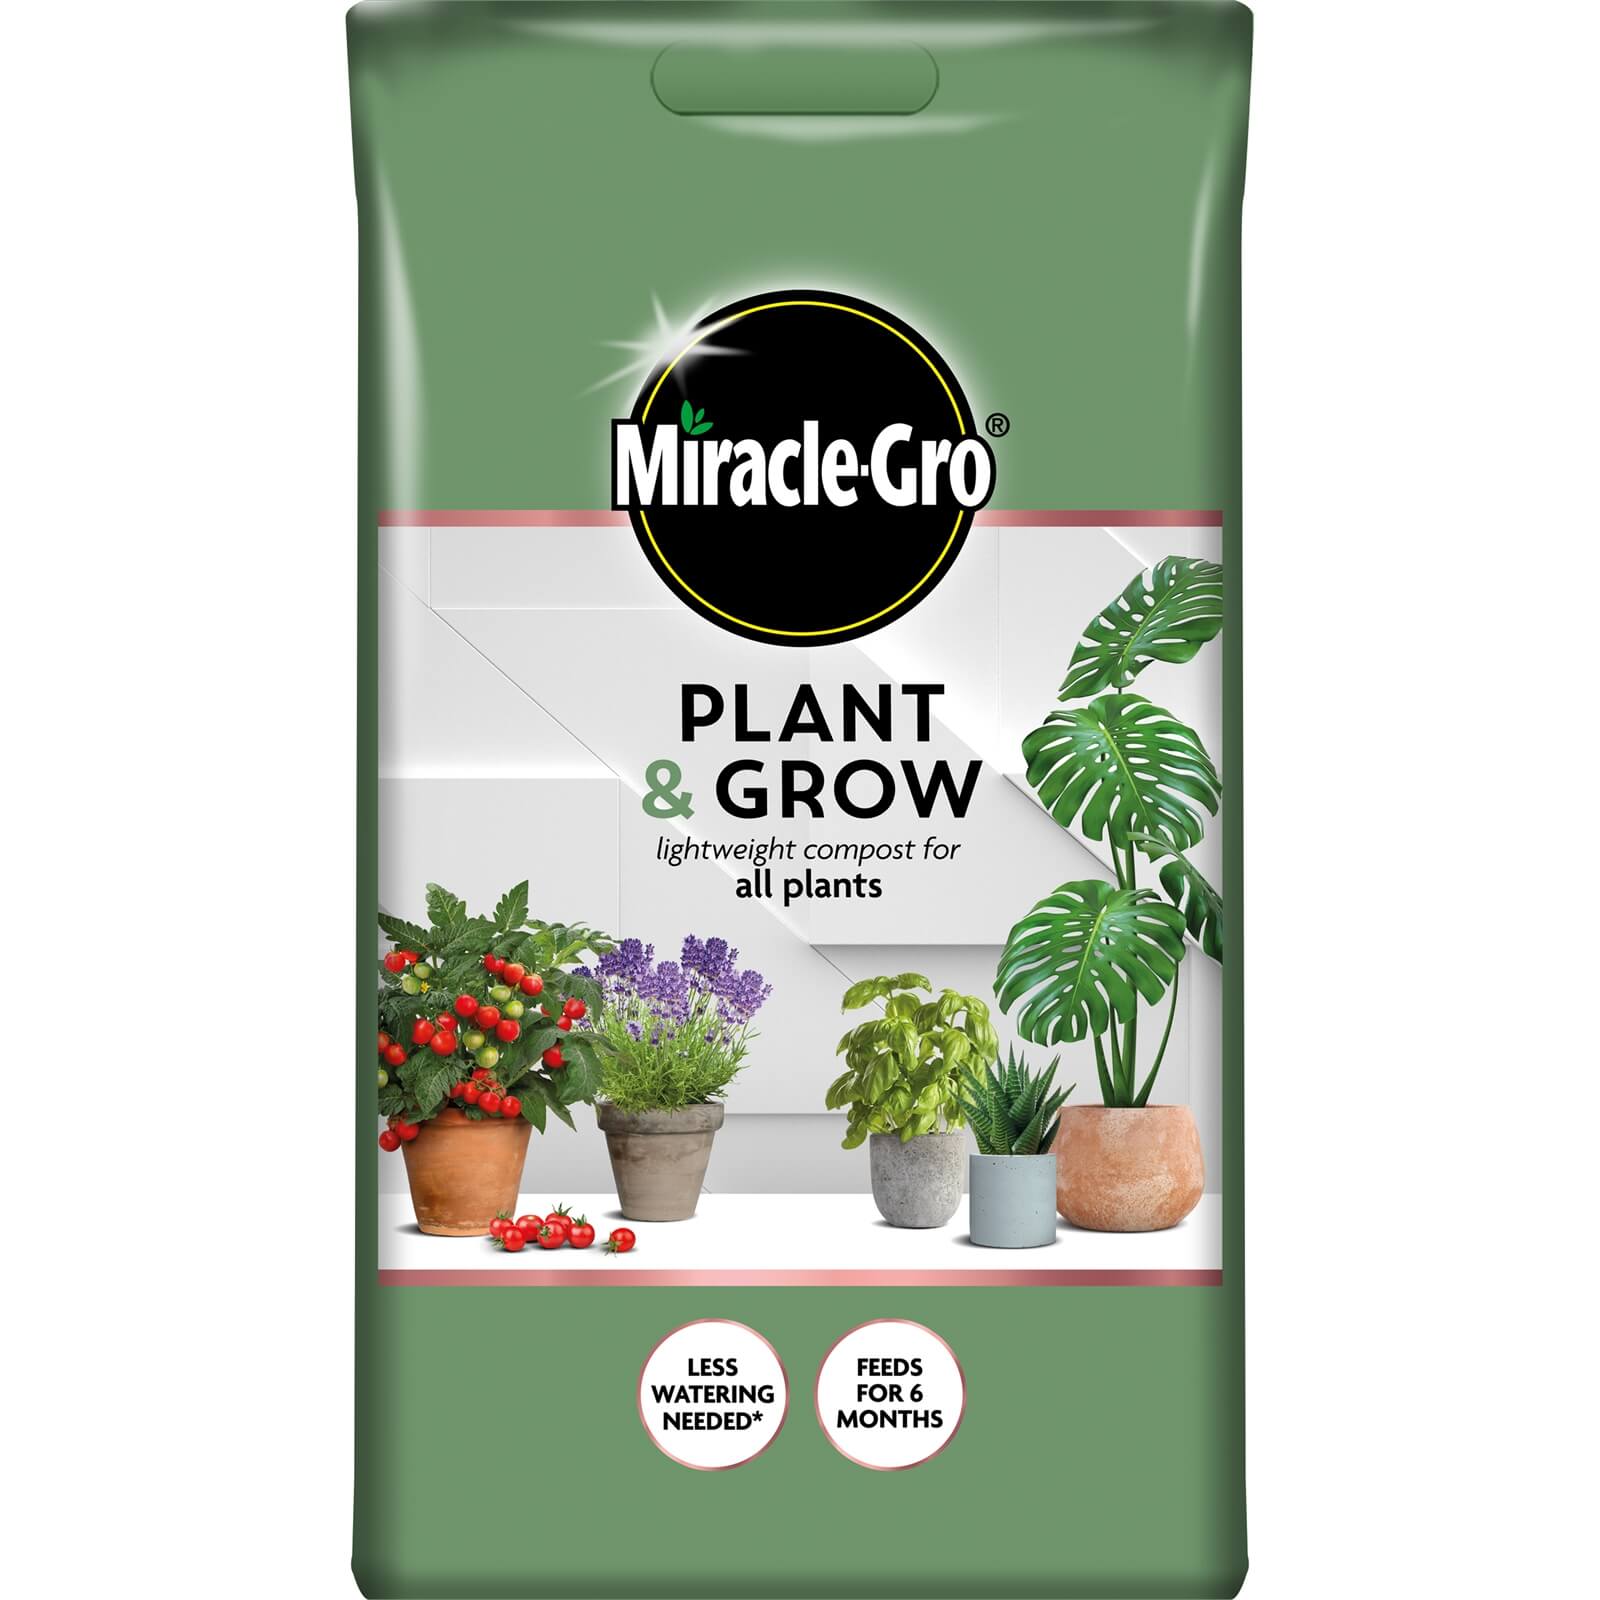 Miracle-Gro Plant & Grow Lightweight Compost for All Plants - 6L